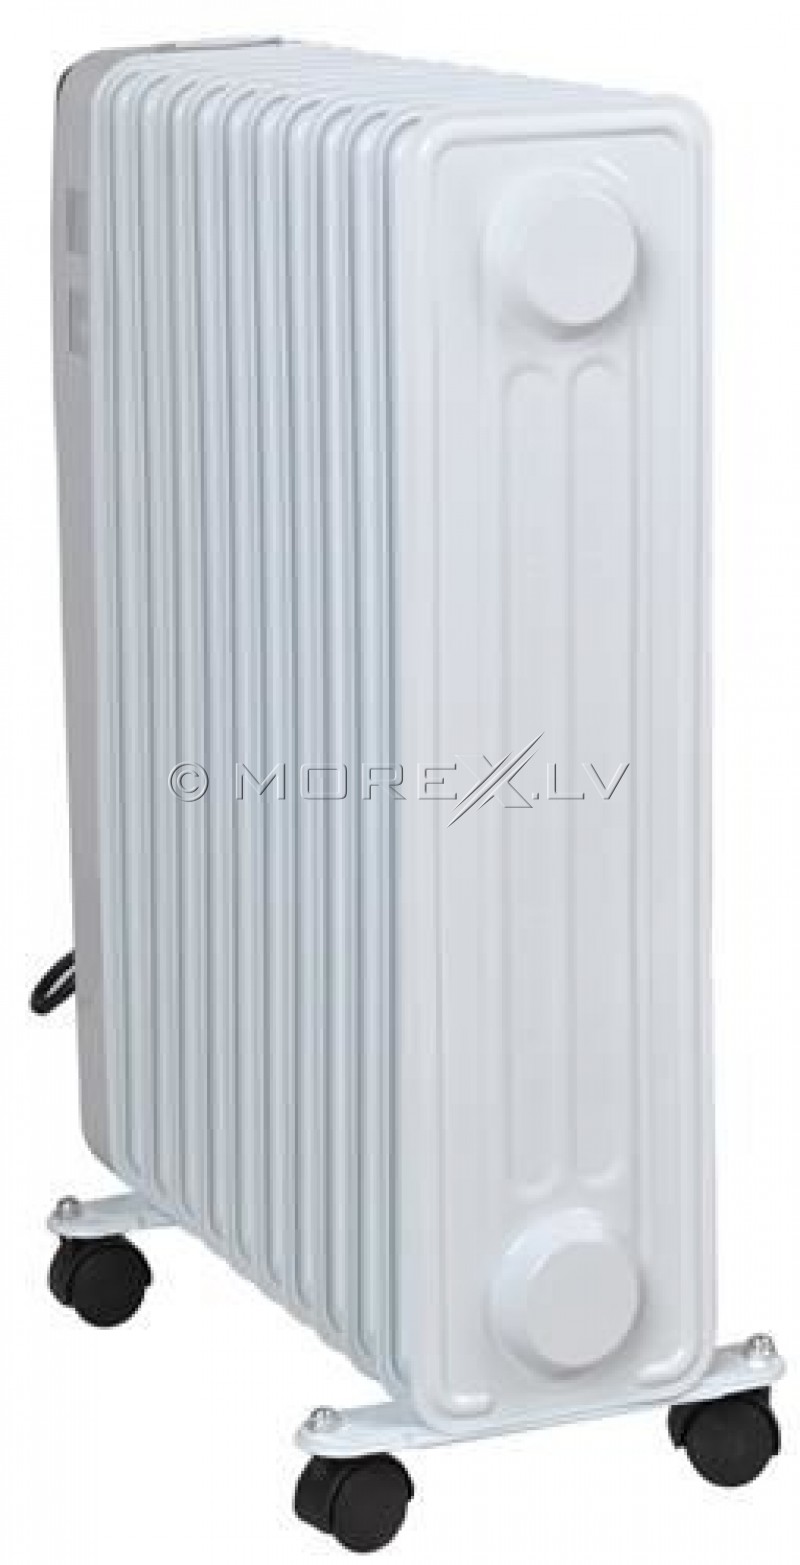 Oil radiator 2900W with thermostat, 11 sections (00002841)